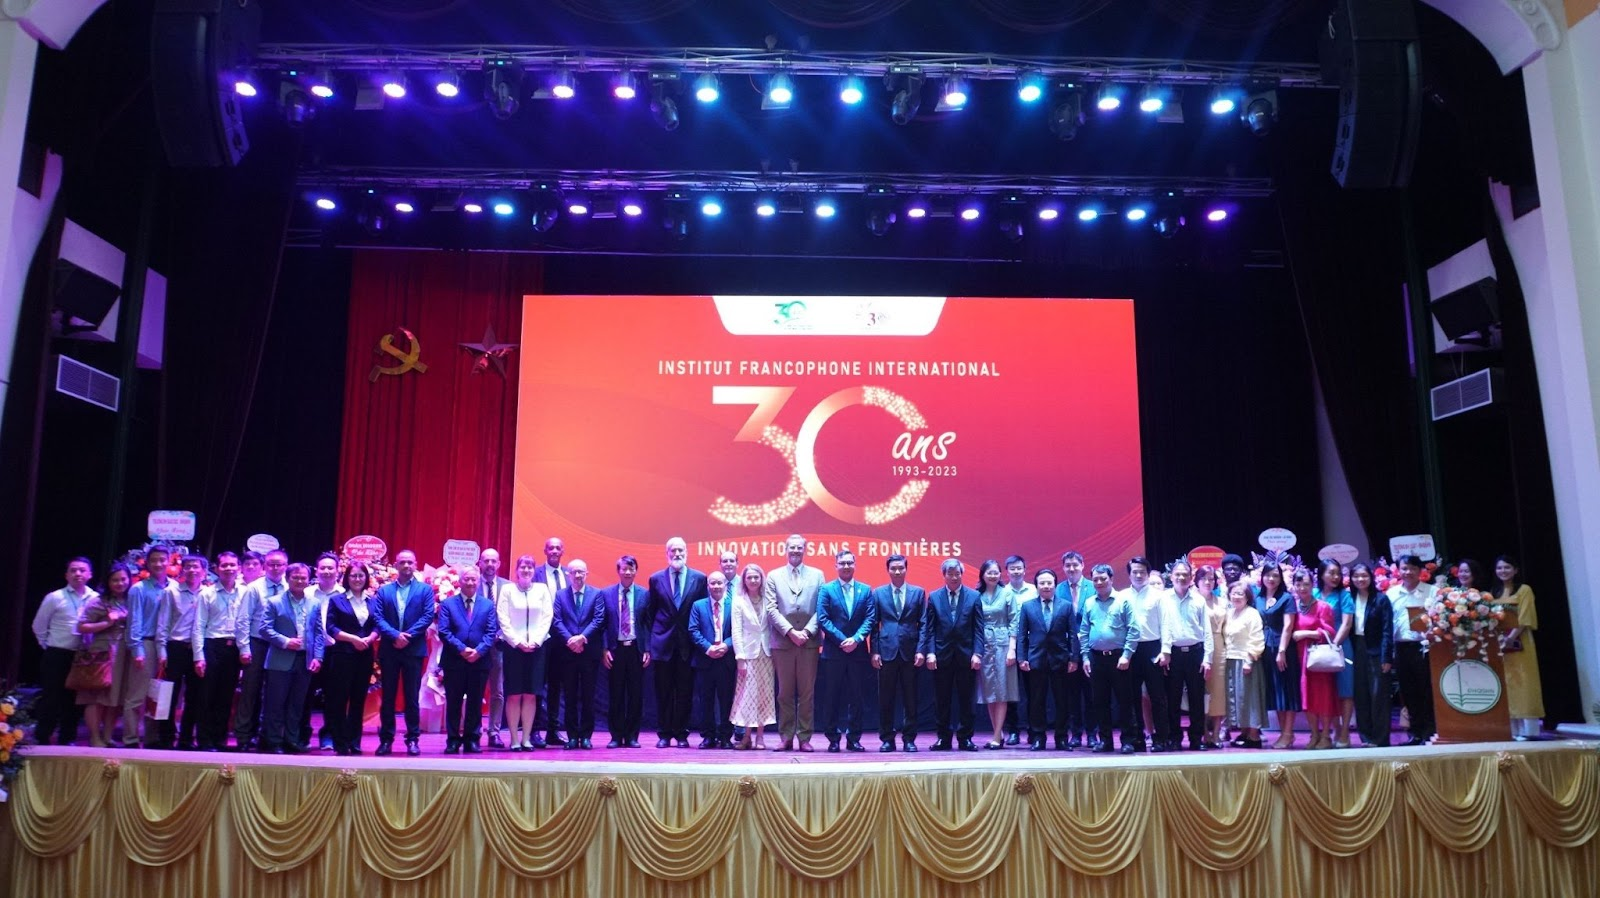 Celebration of the 30th Anniversary of IFI (1993-2023)